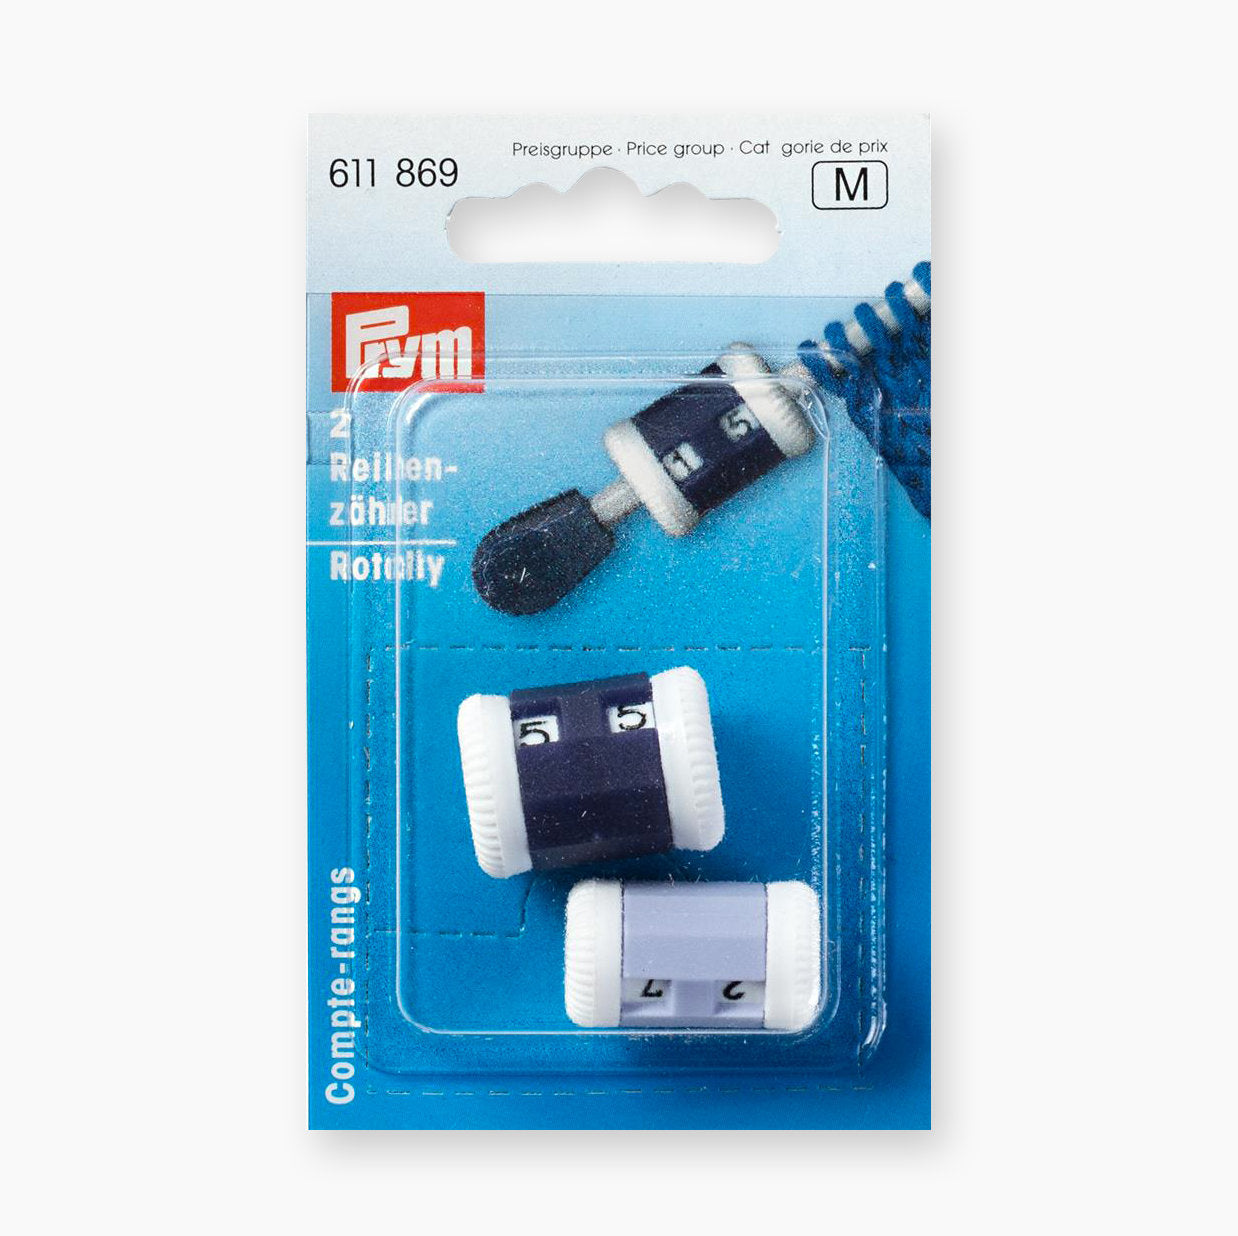 Prym 611869 Round Counter Set for knitting: Increase your productivity with these practical accessories